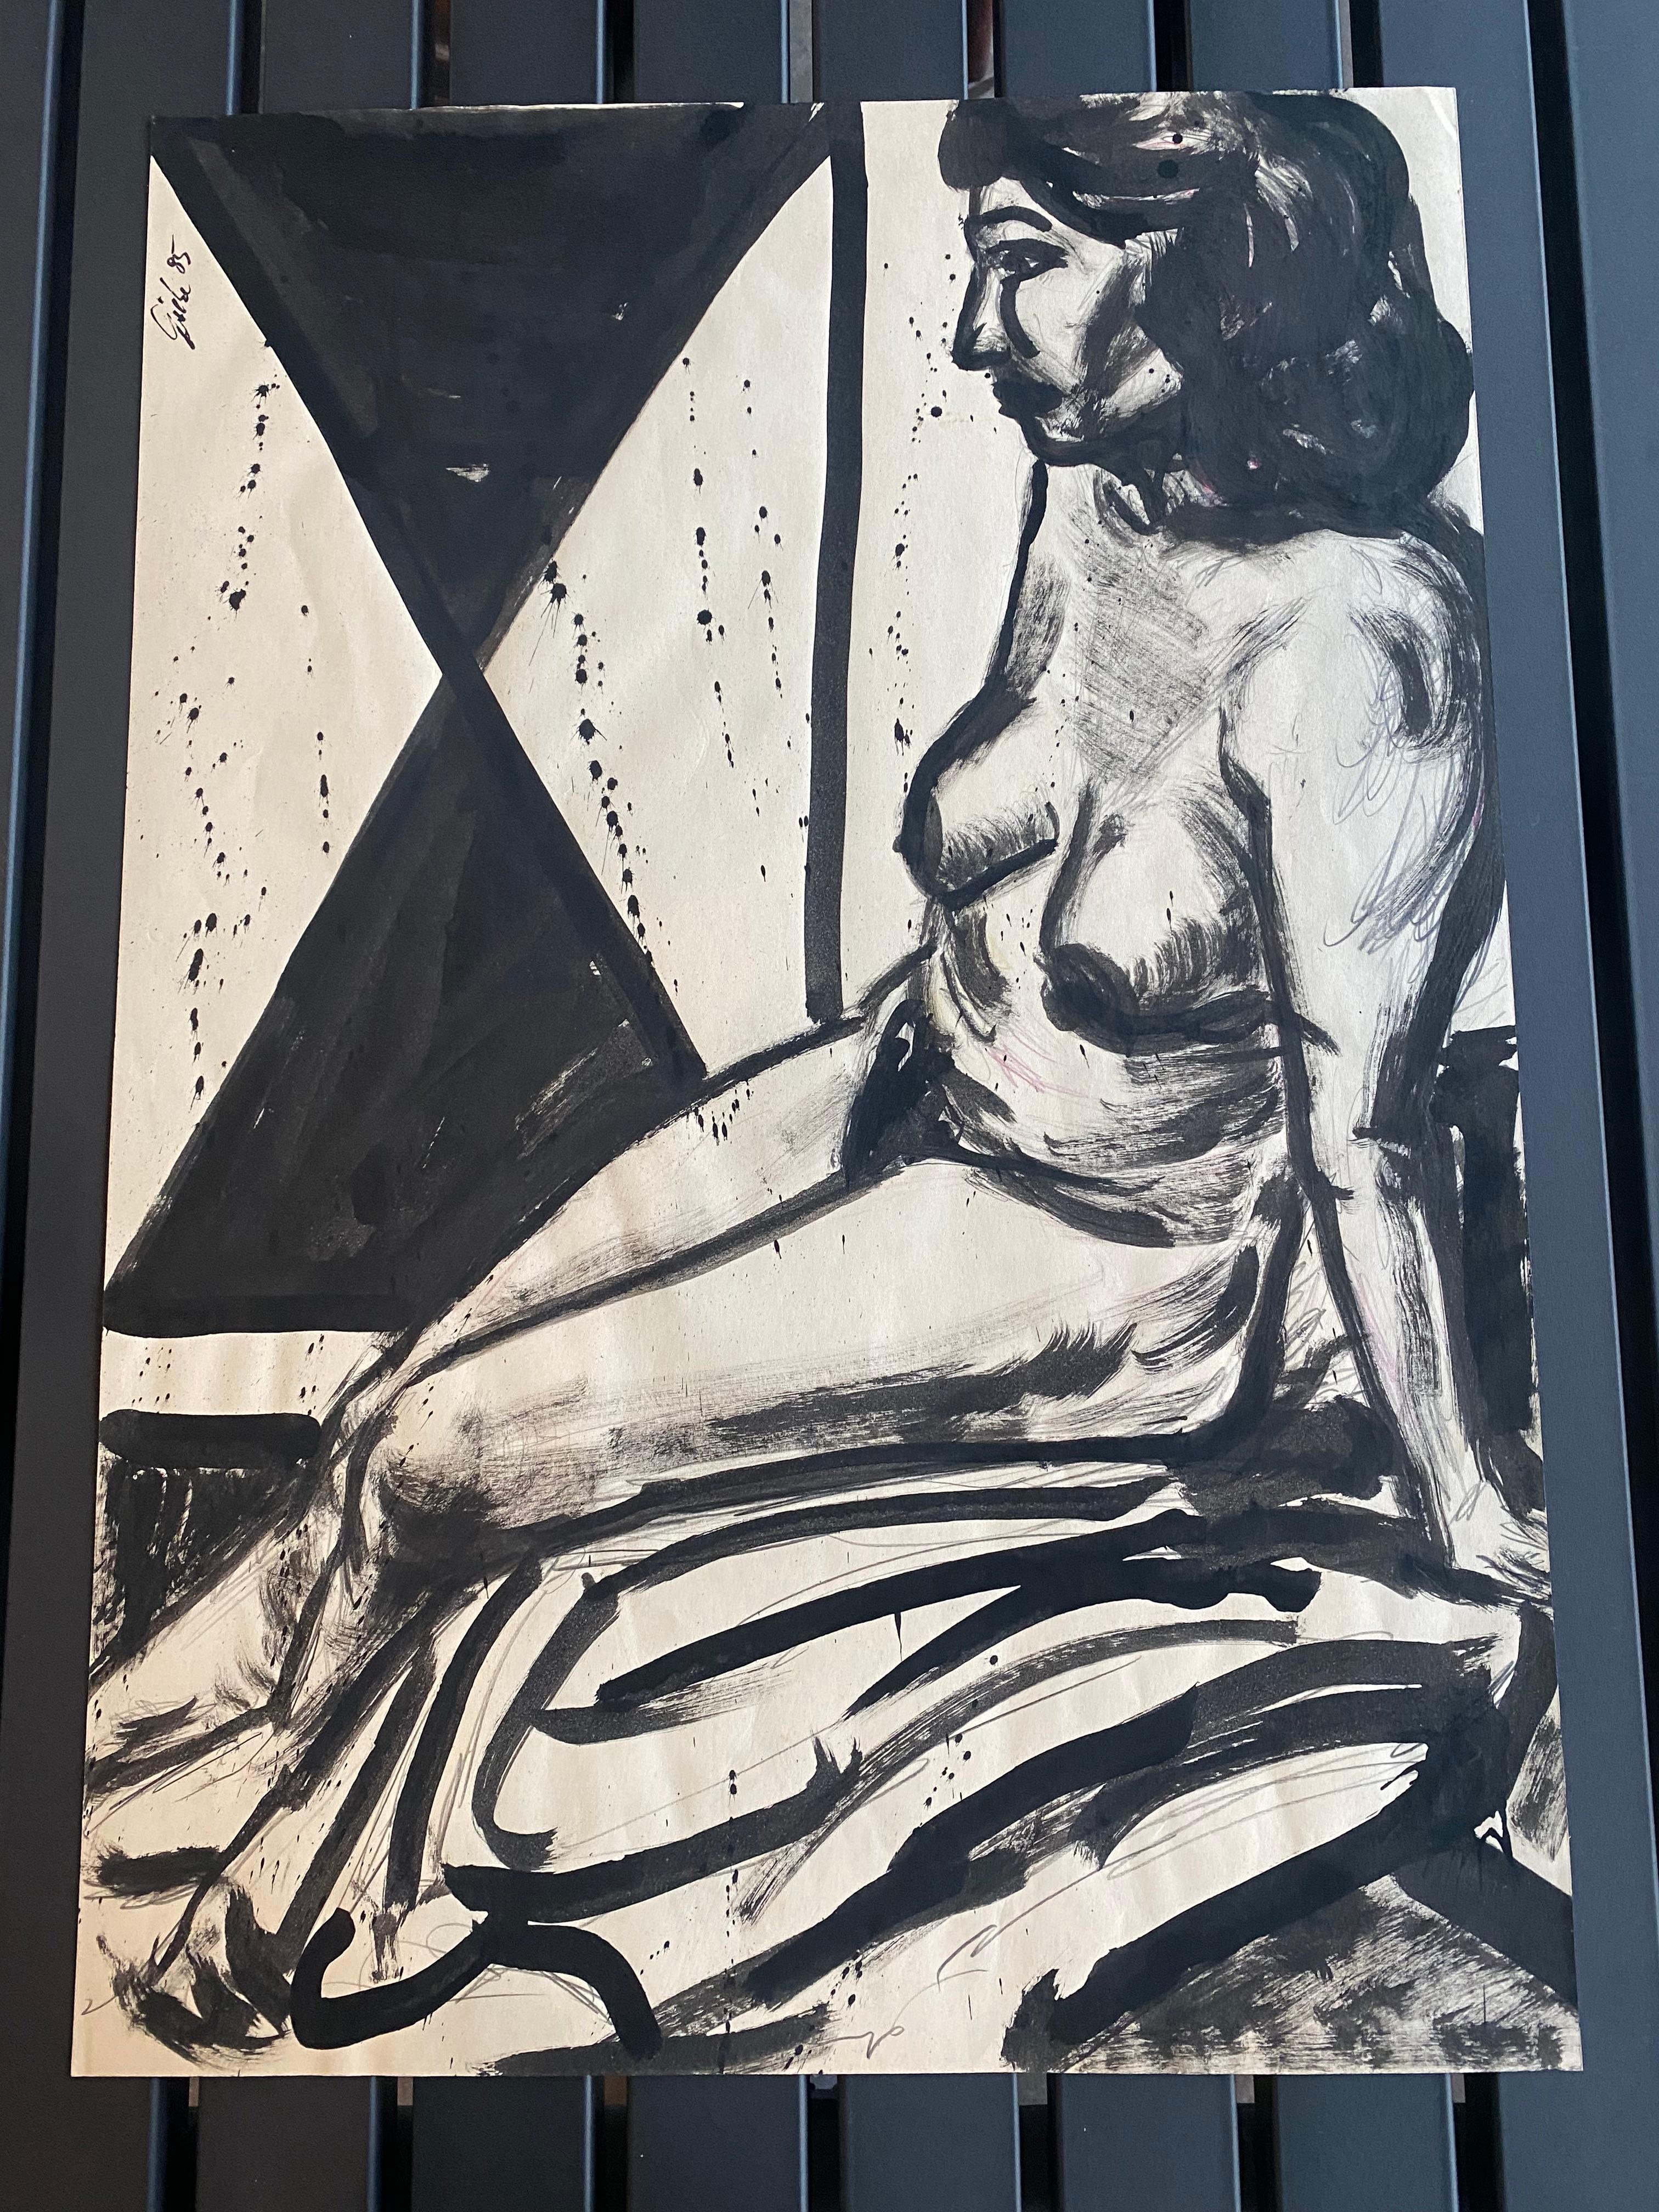 Hubertus Giebe's original ink drawing depicting a female nude is offered unframed and will be sent in a roll.
The picture is signed and dated upper left.
The artist:
Hubertus Giebe was born as the first son of Margarete and Reinhold Giebe. The